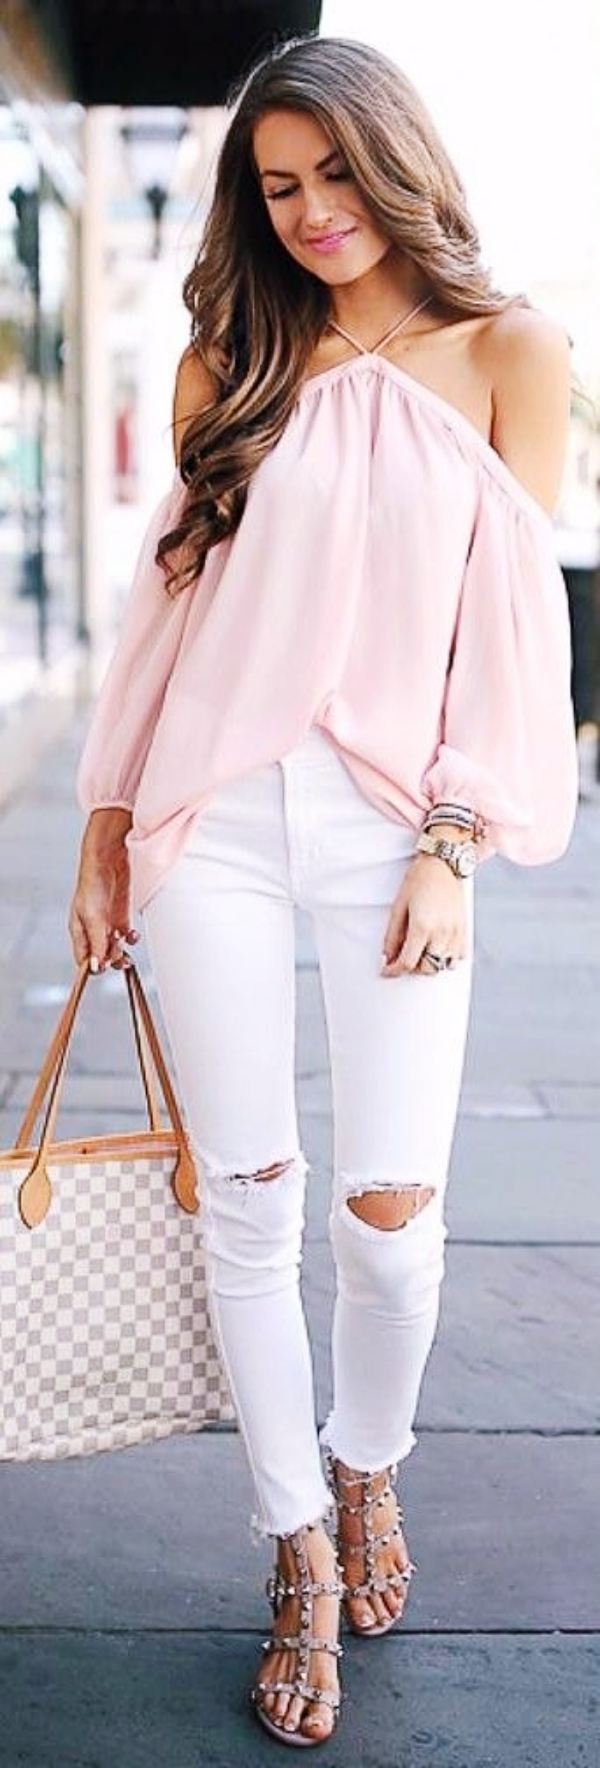 Light-on-Light-Outfit-Combinations